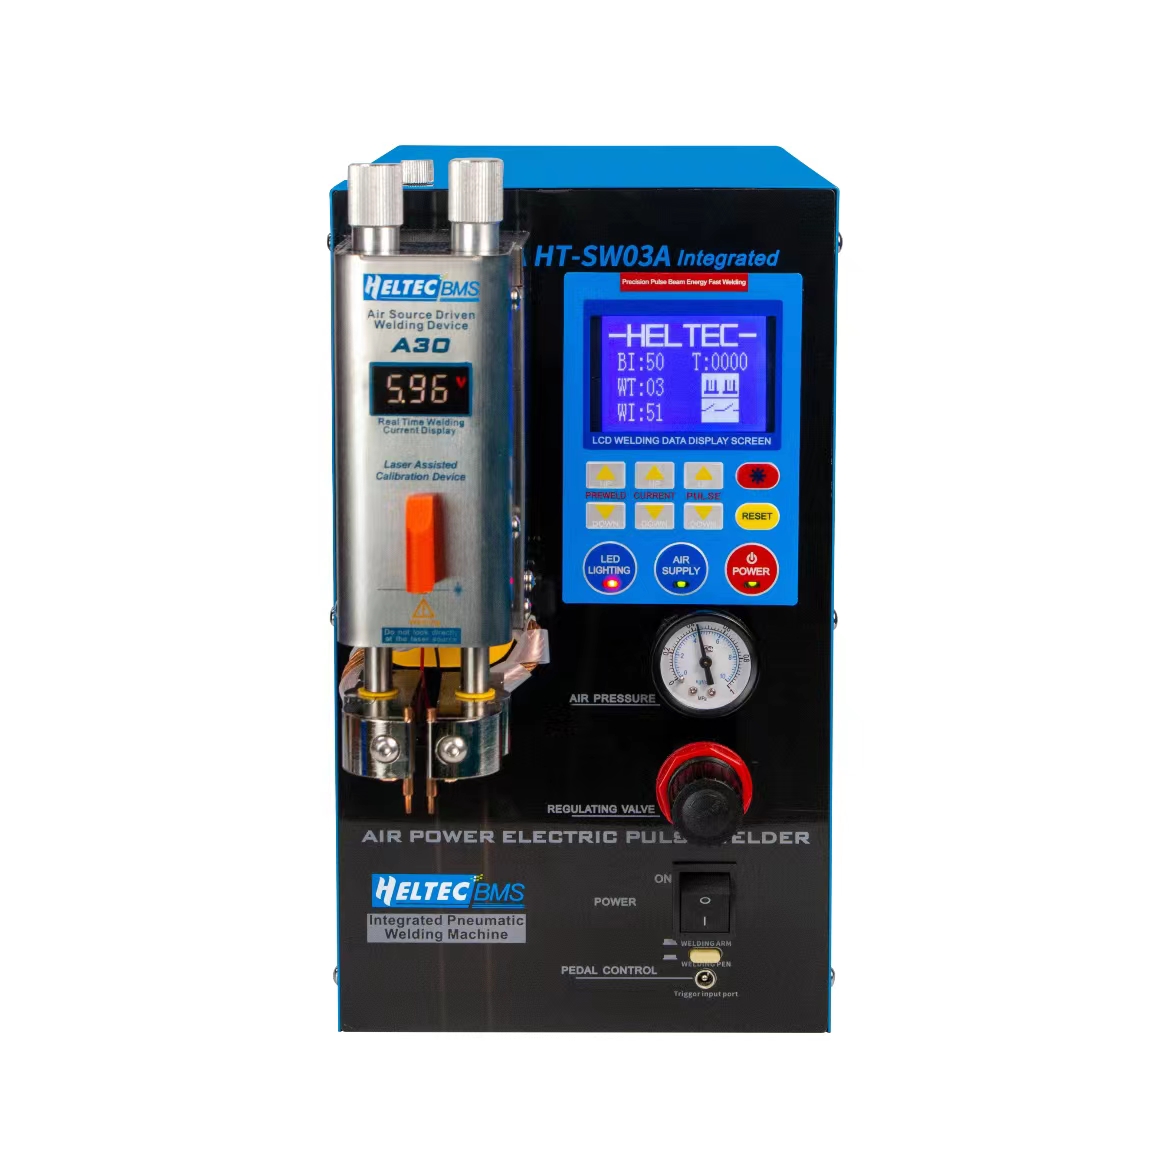 pneumatic-welder-HT-SW03A-with-built-in-air-compressor-2